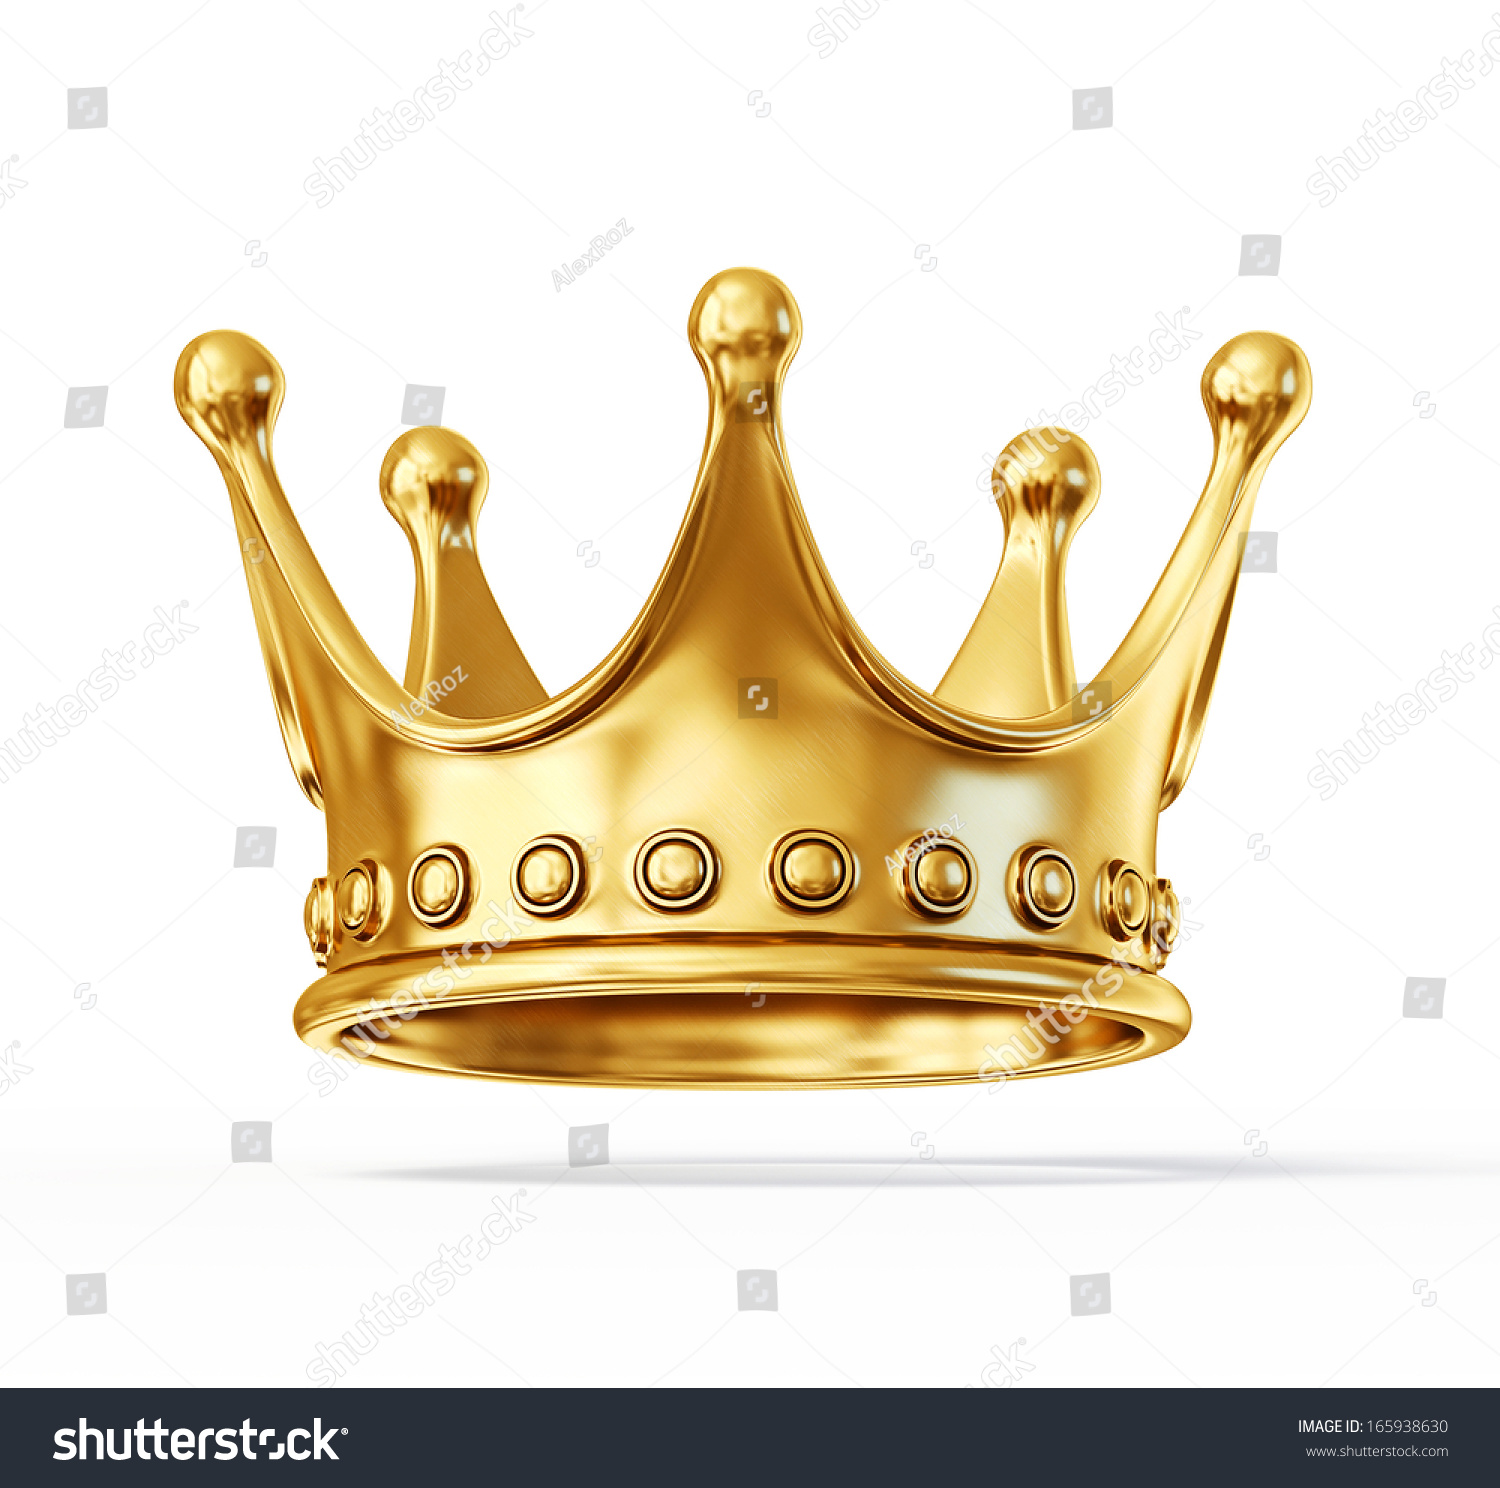 Golden Crown Isolated On A White Background Stock Photo 165938630 ...